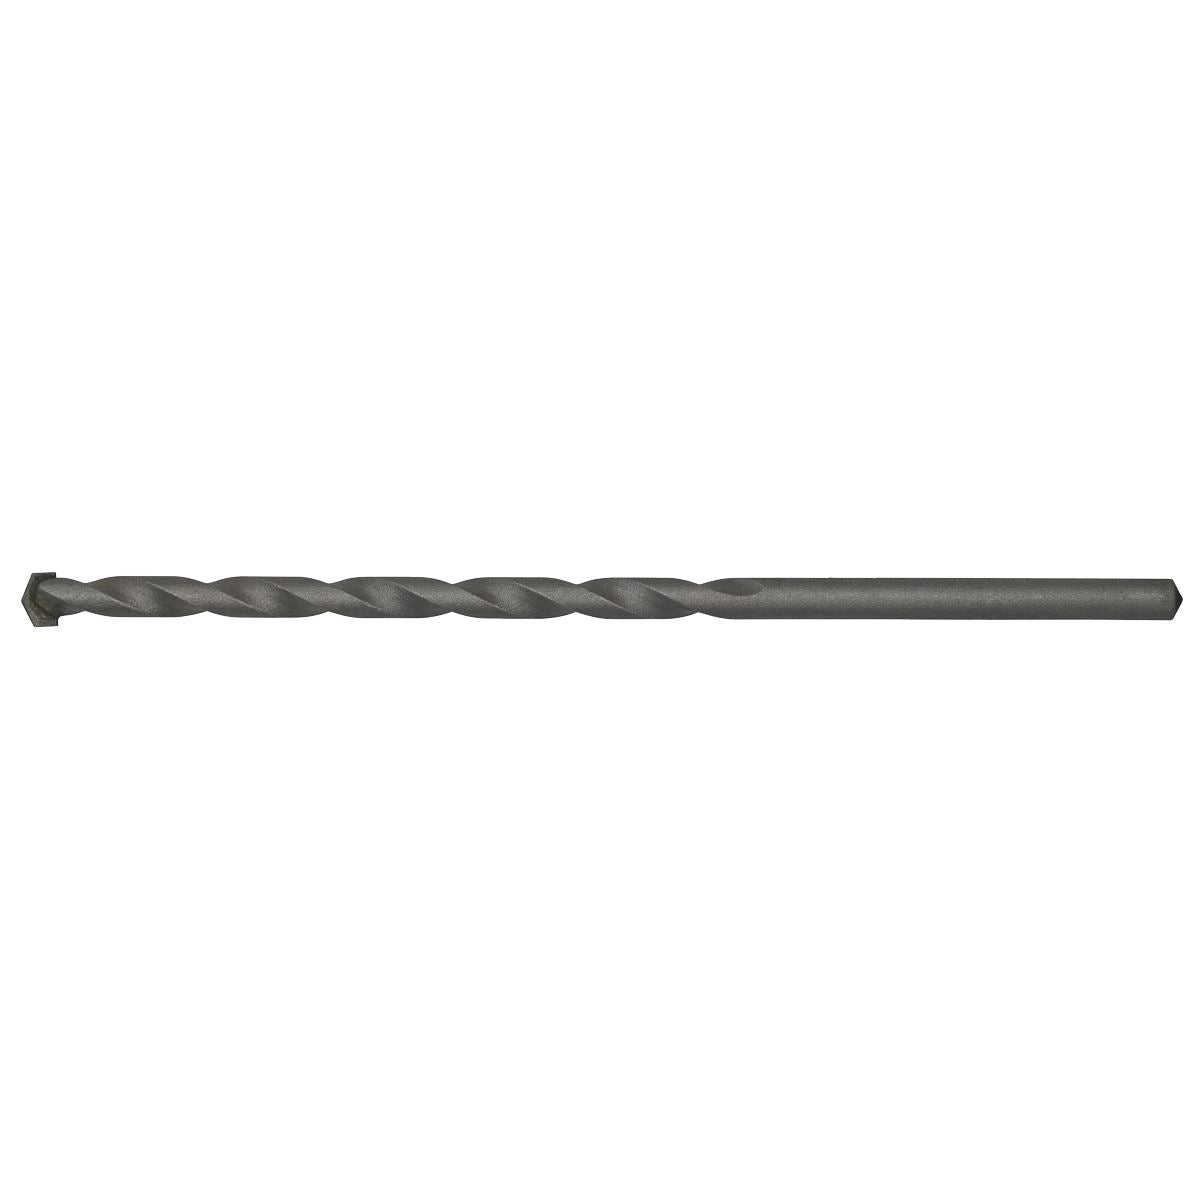 Worksafe by Sealey Straight Shank Rotary Impact Drill Bit Ø8 x 150mm